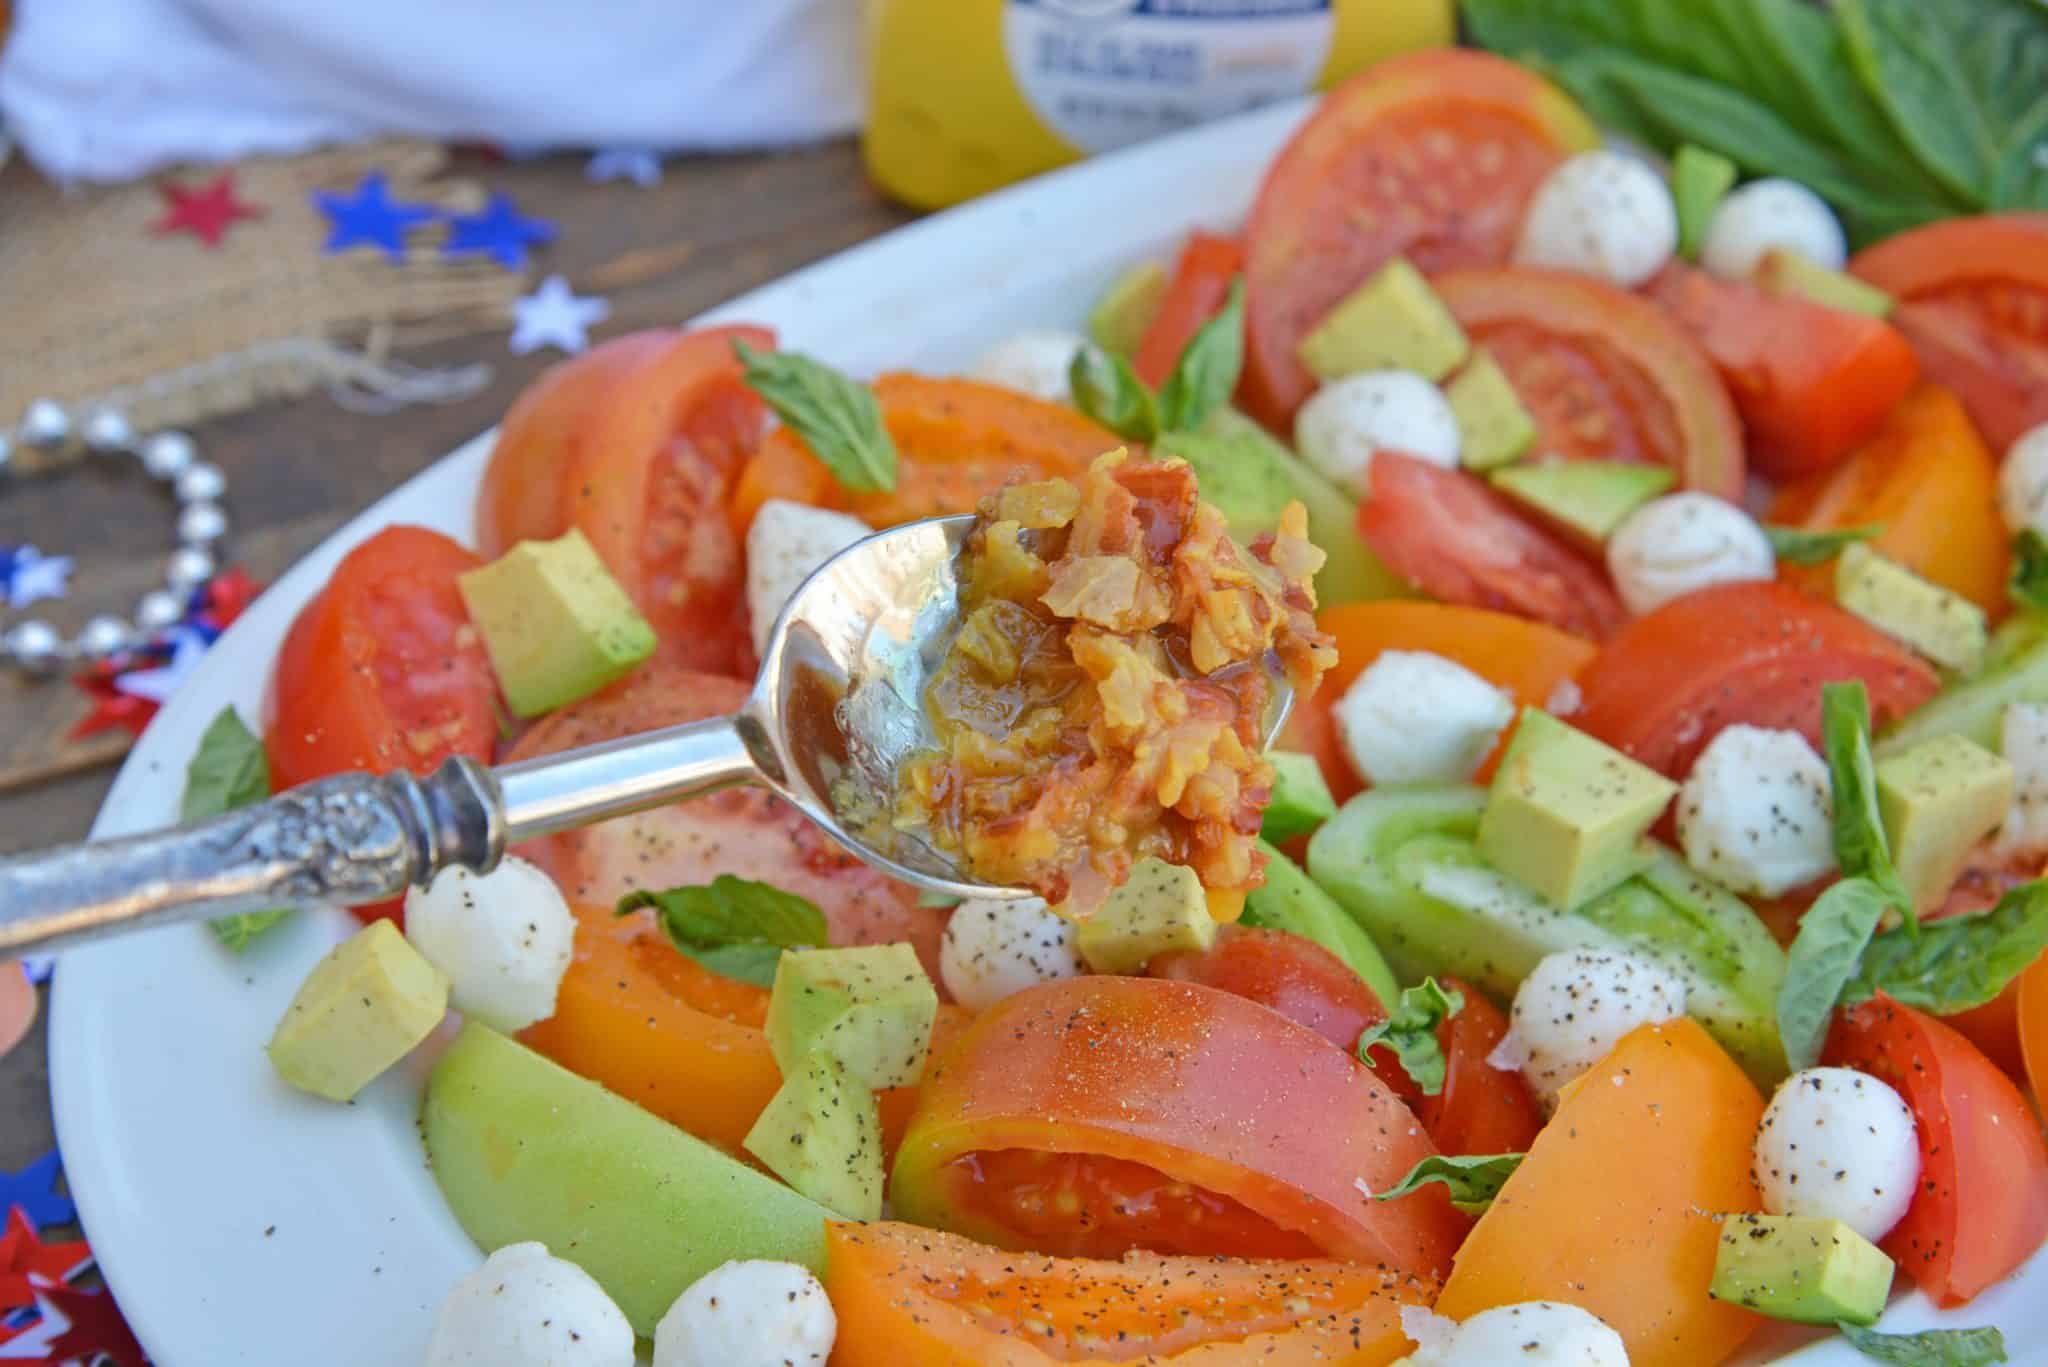 Tomato Salad with Mustard Bacon Dressing is the ultimate summer side dish using lush tomatoes, avocado mozzarella basil. Make it ahead for any party or BBQ. #tomatosalad #tomatorecipes www.savoryexperiments.com